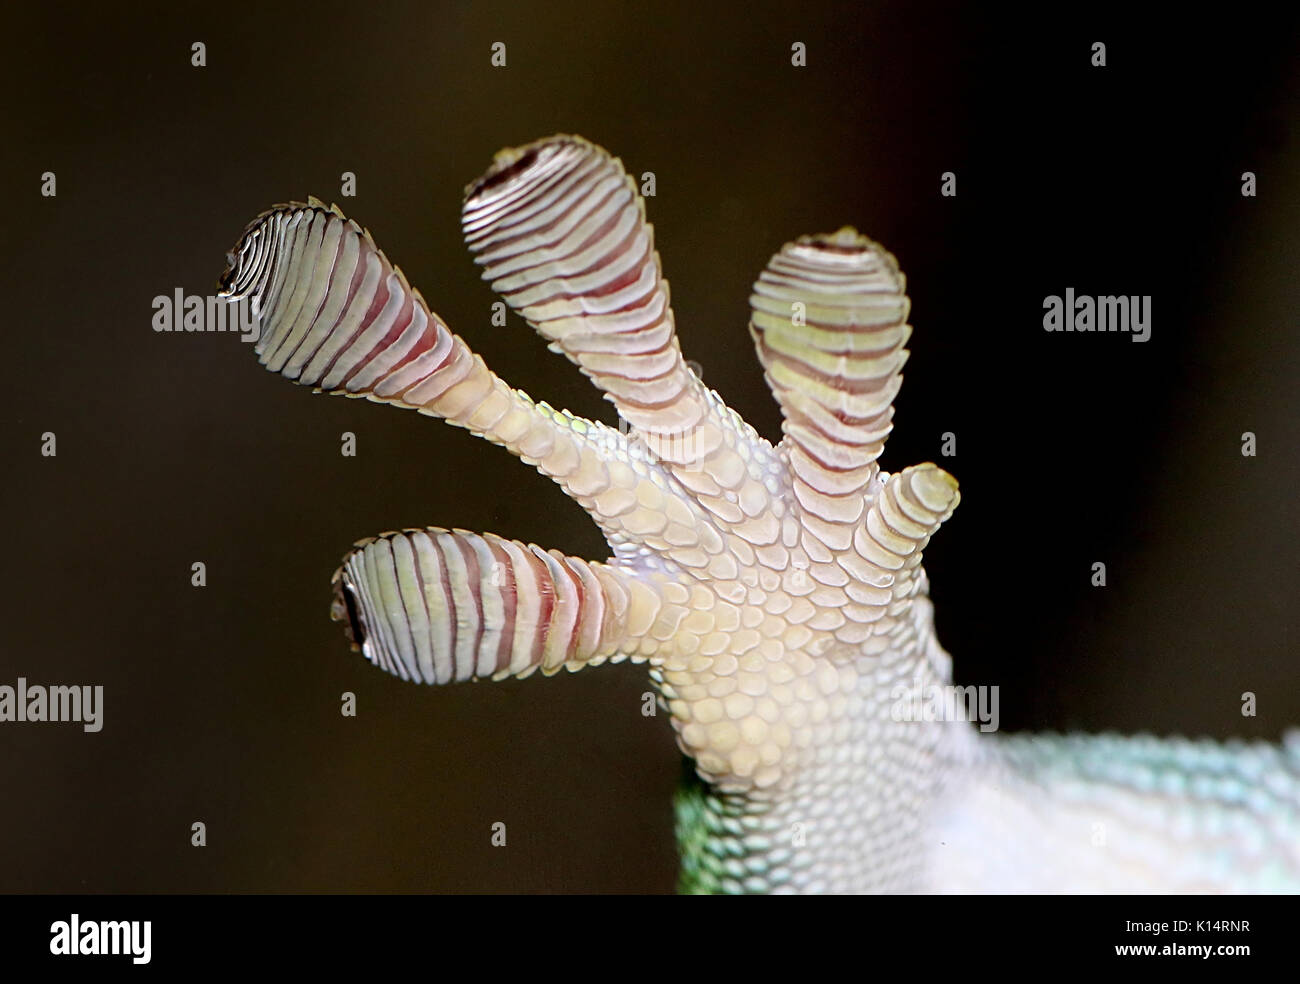 Close-up of a Green Madagascar Day Gecko (Phelsuma madagascariensis) front foot clinging to a glass window pane with sticky toe pads Stock Photo